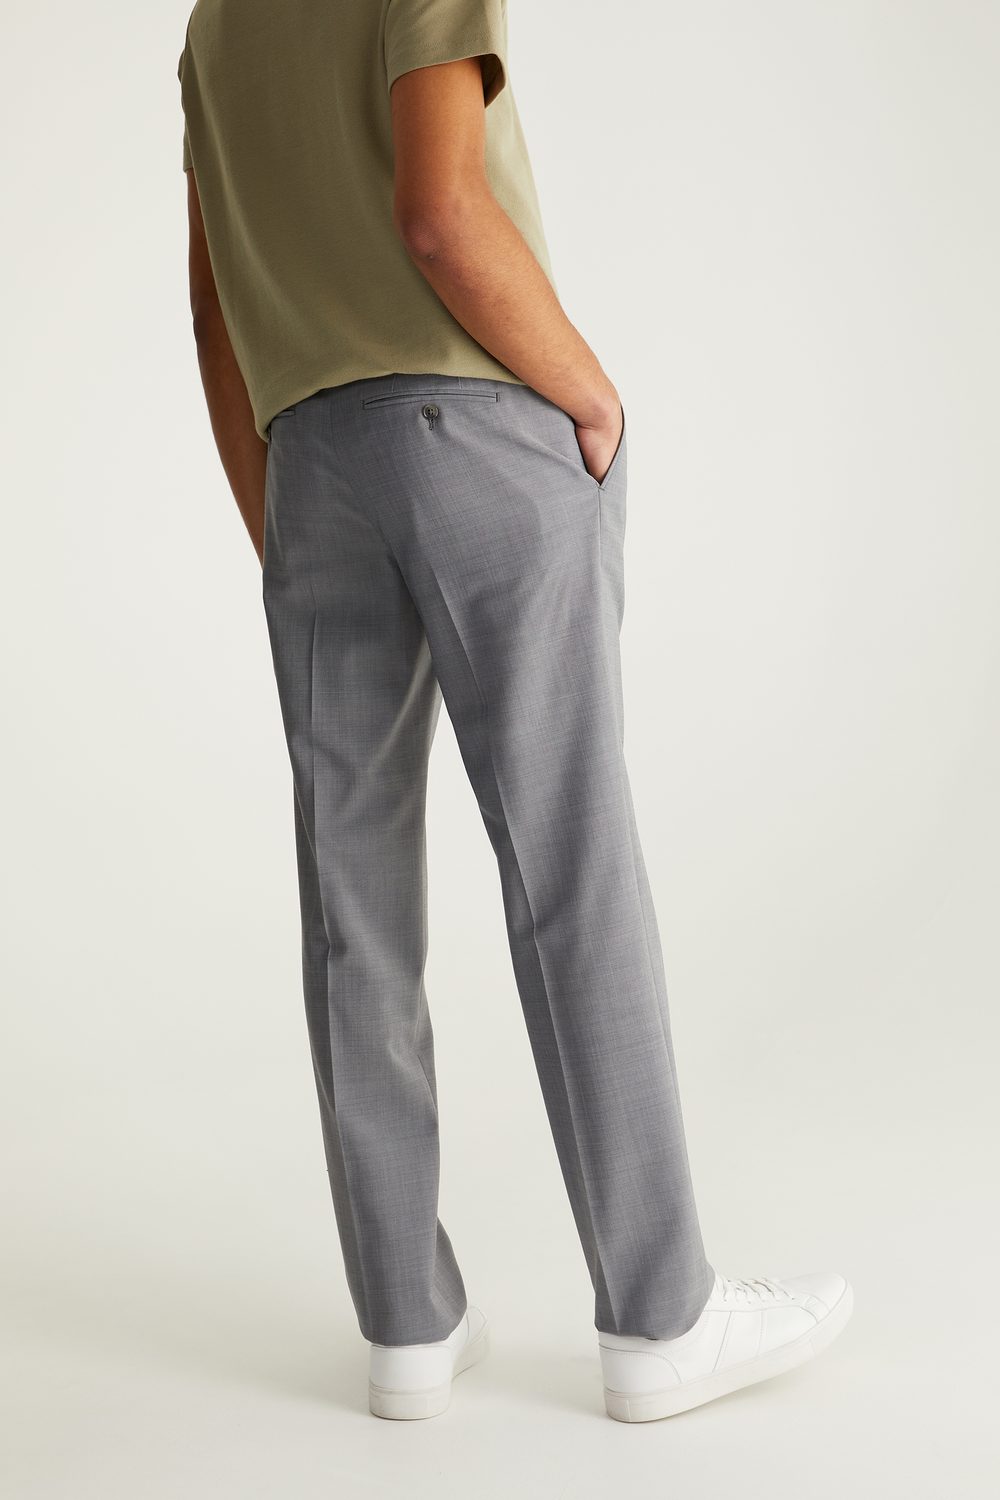 Solid Urban Fit Pant